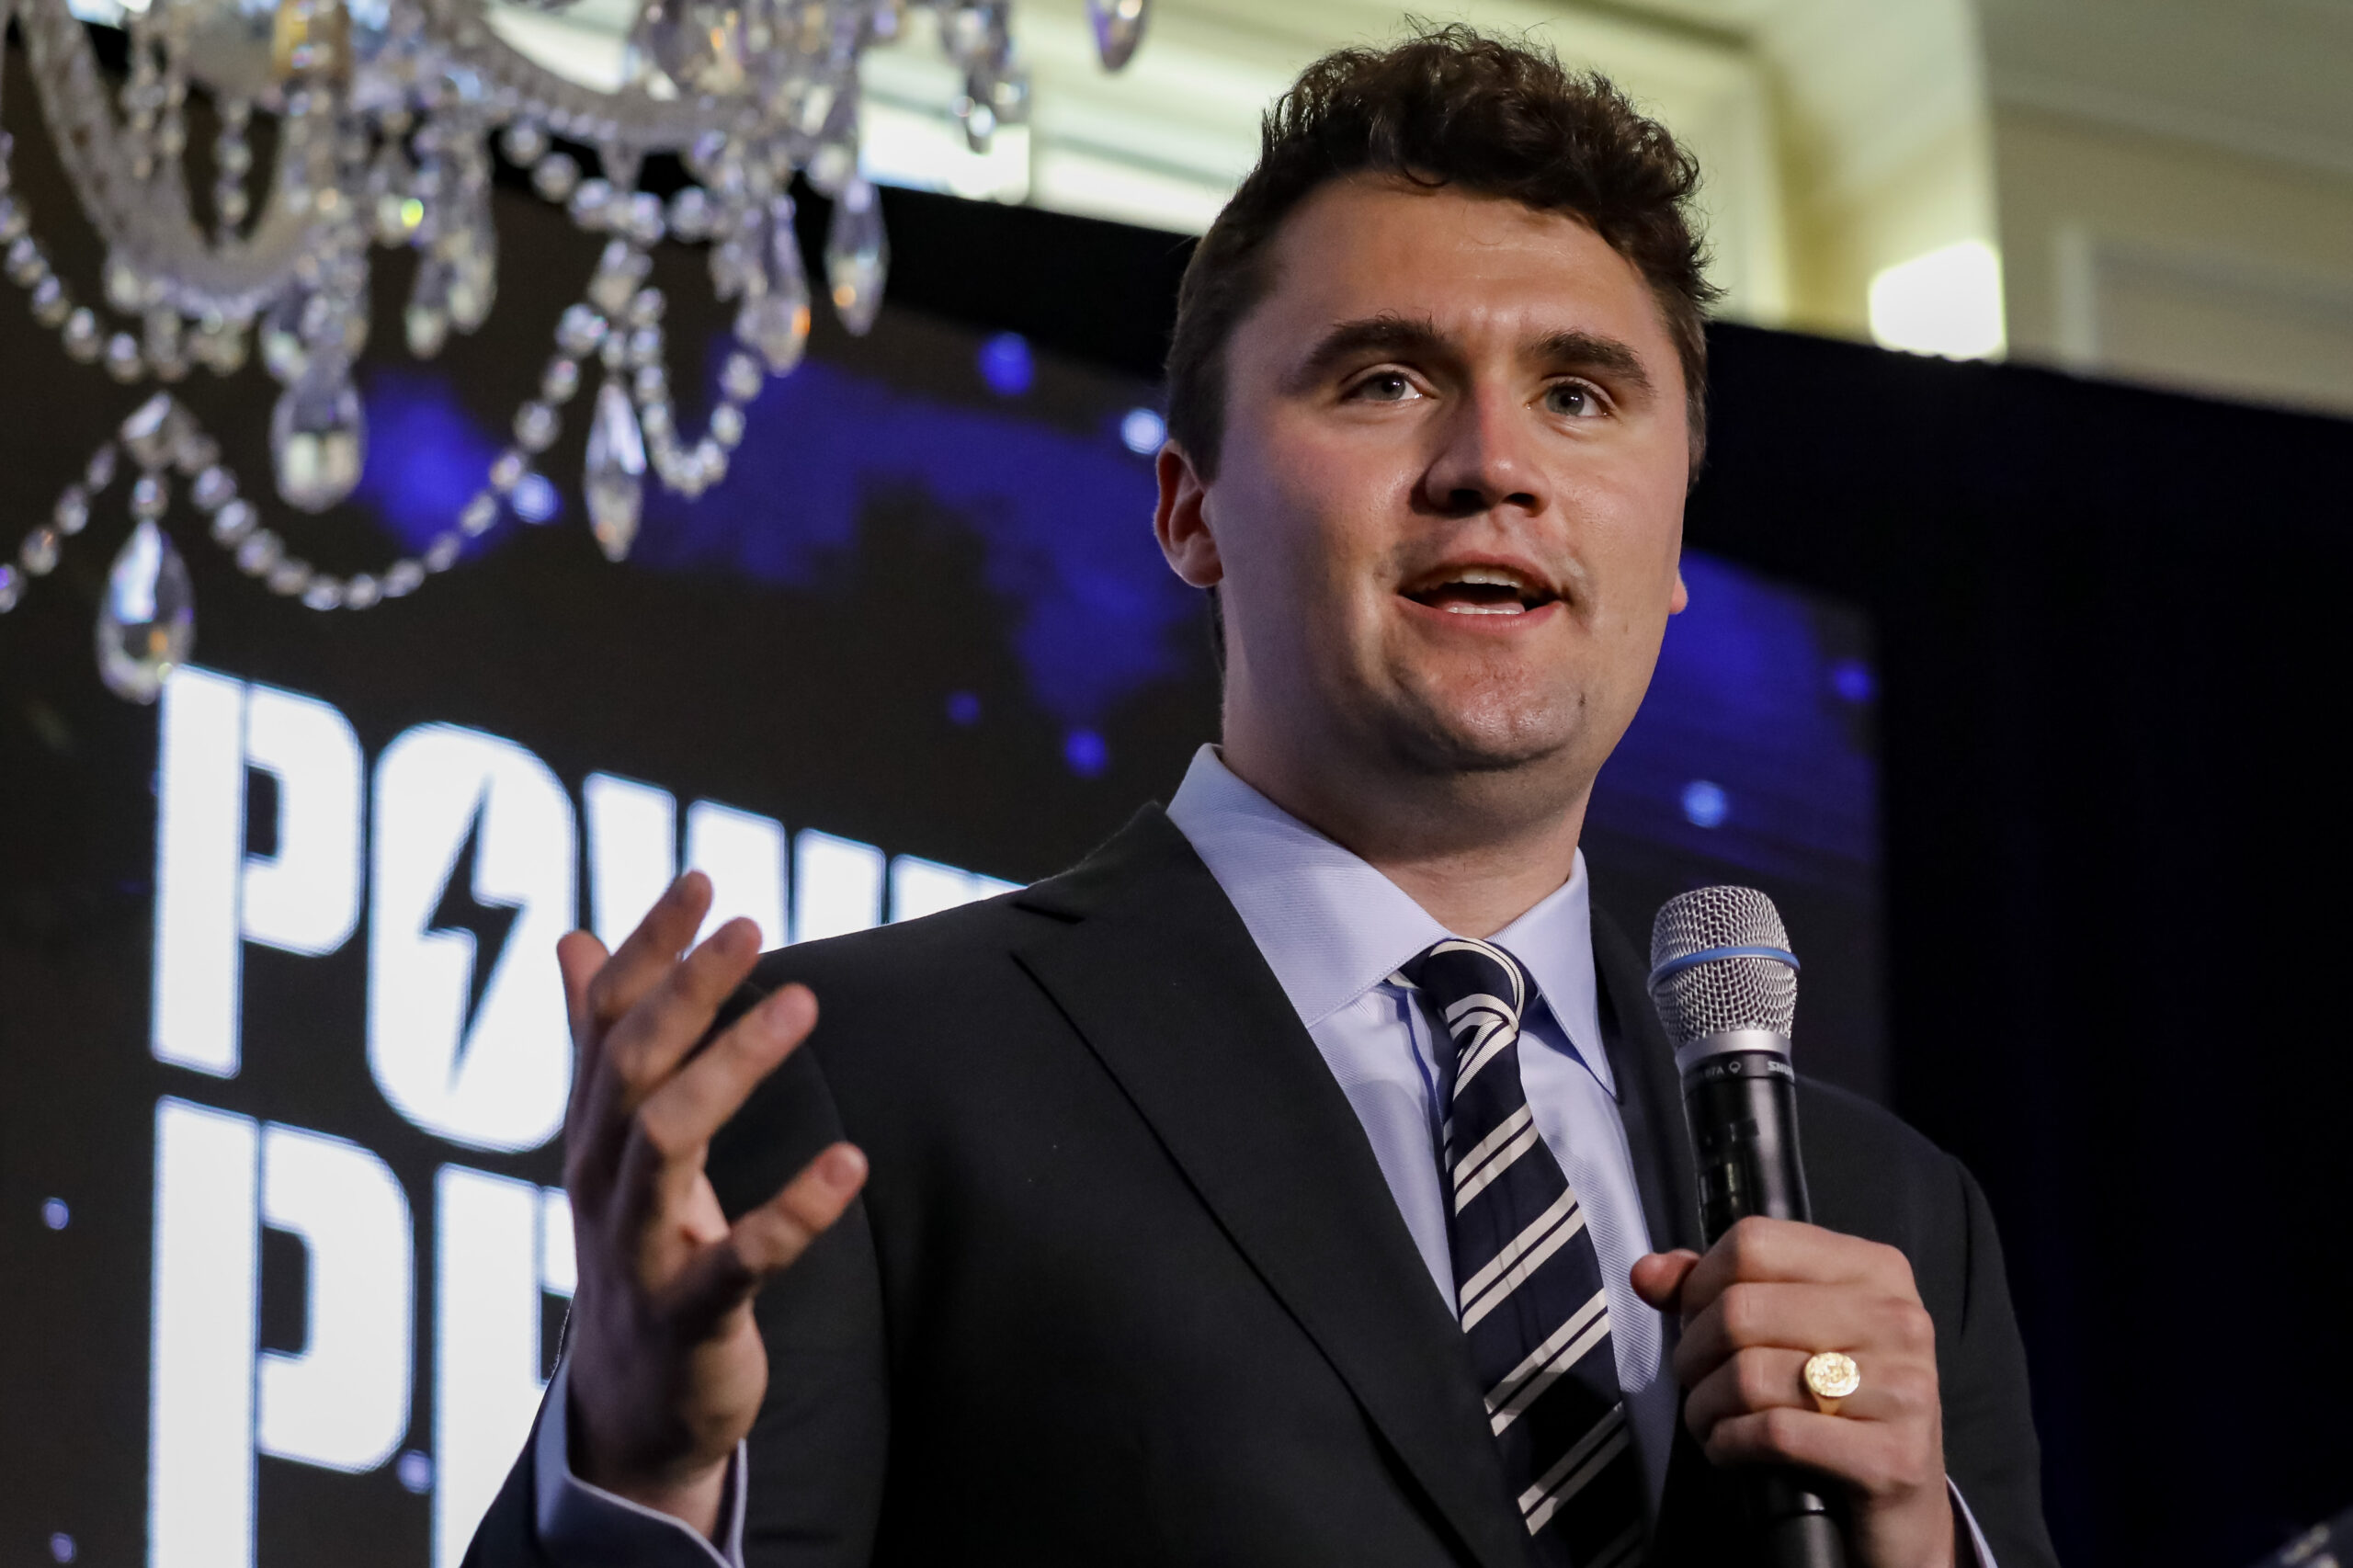 Two Arrested, One Officer Injured As Protesters Damage Property Ahead Of Charlie Kirk Event At California University